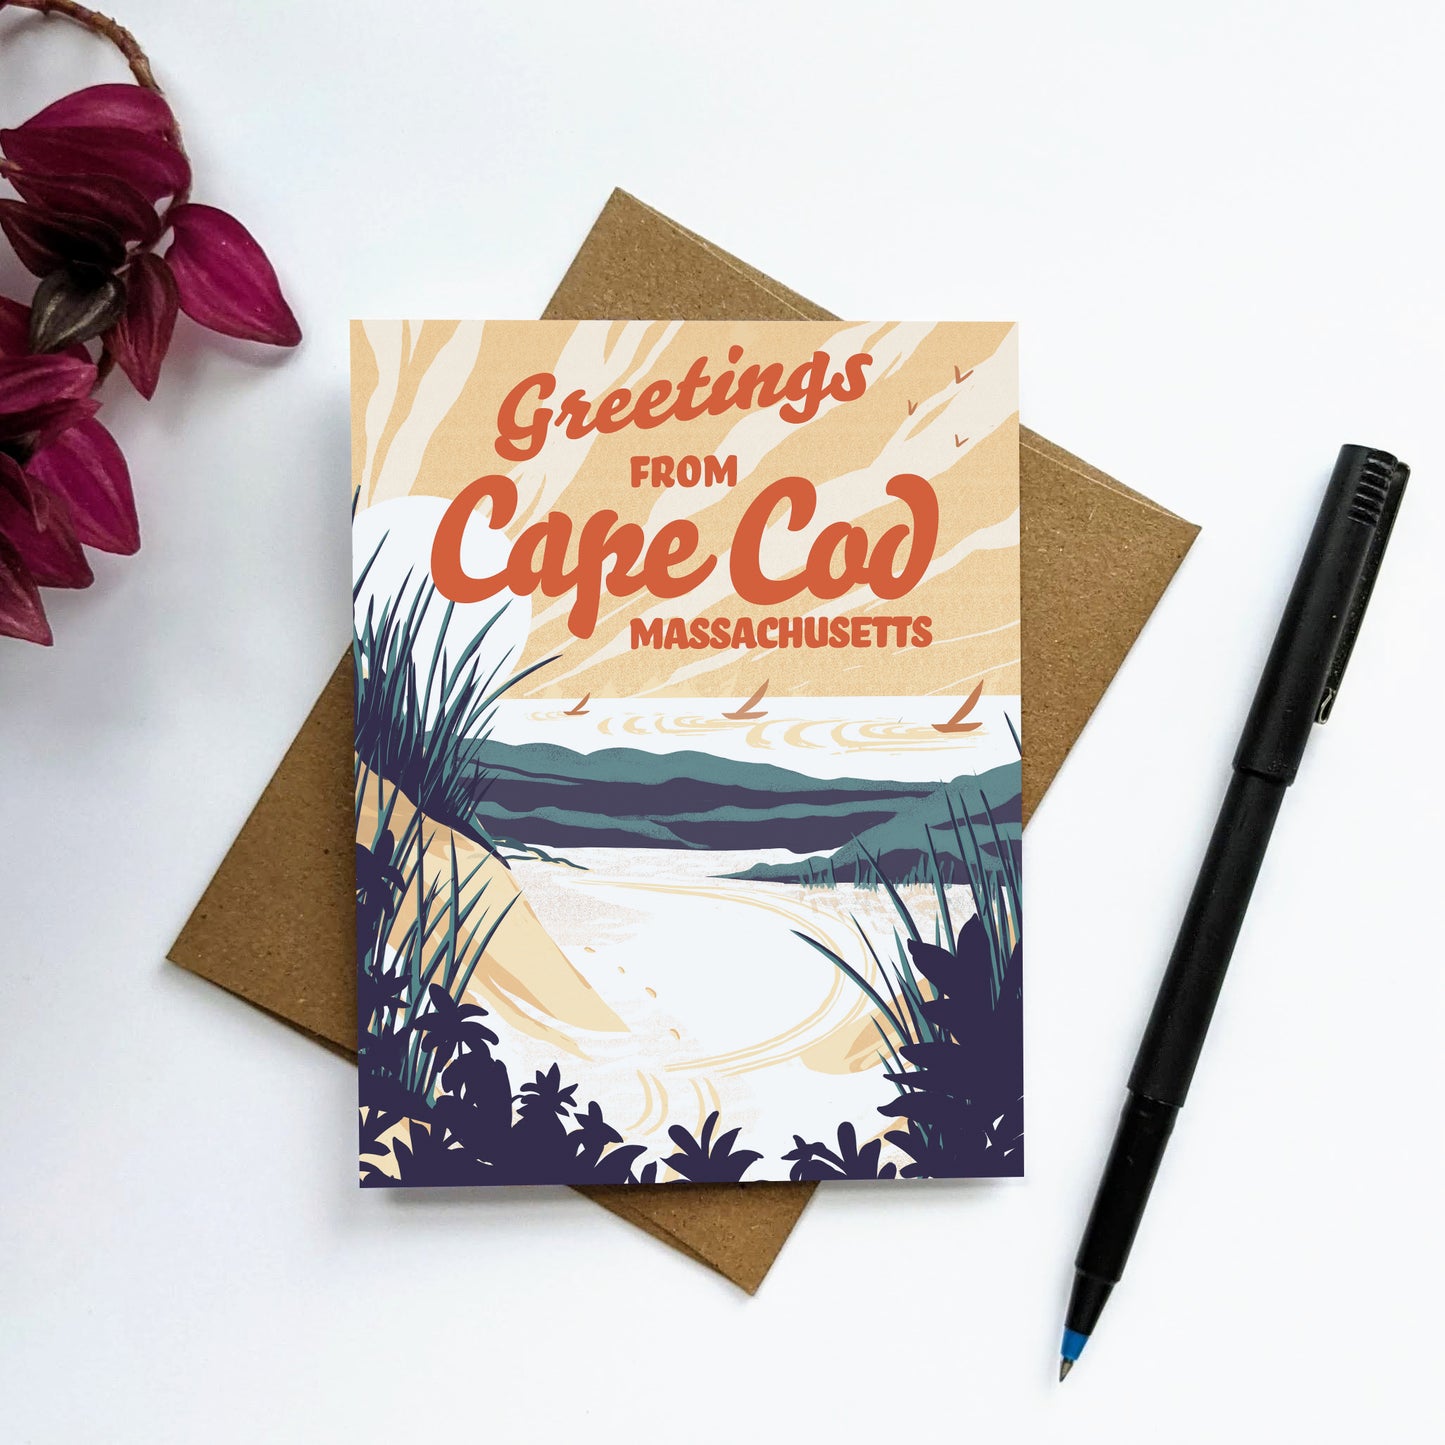 "Greetings from Cape Cod" Greeting Card